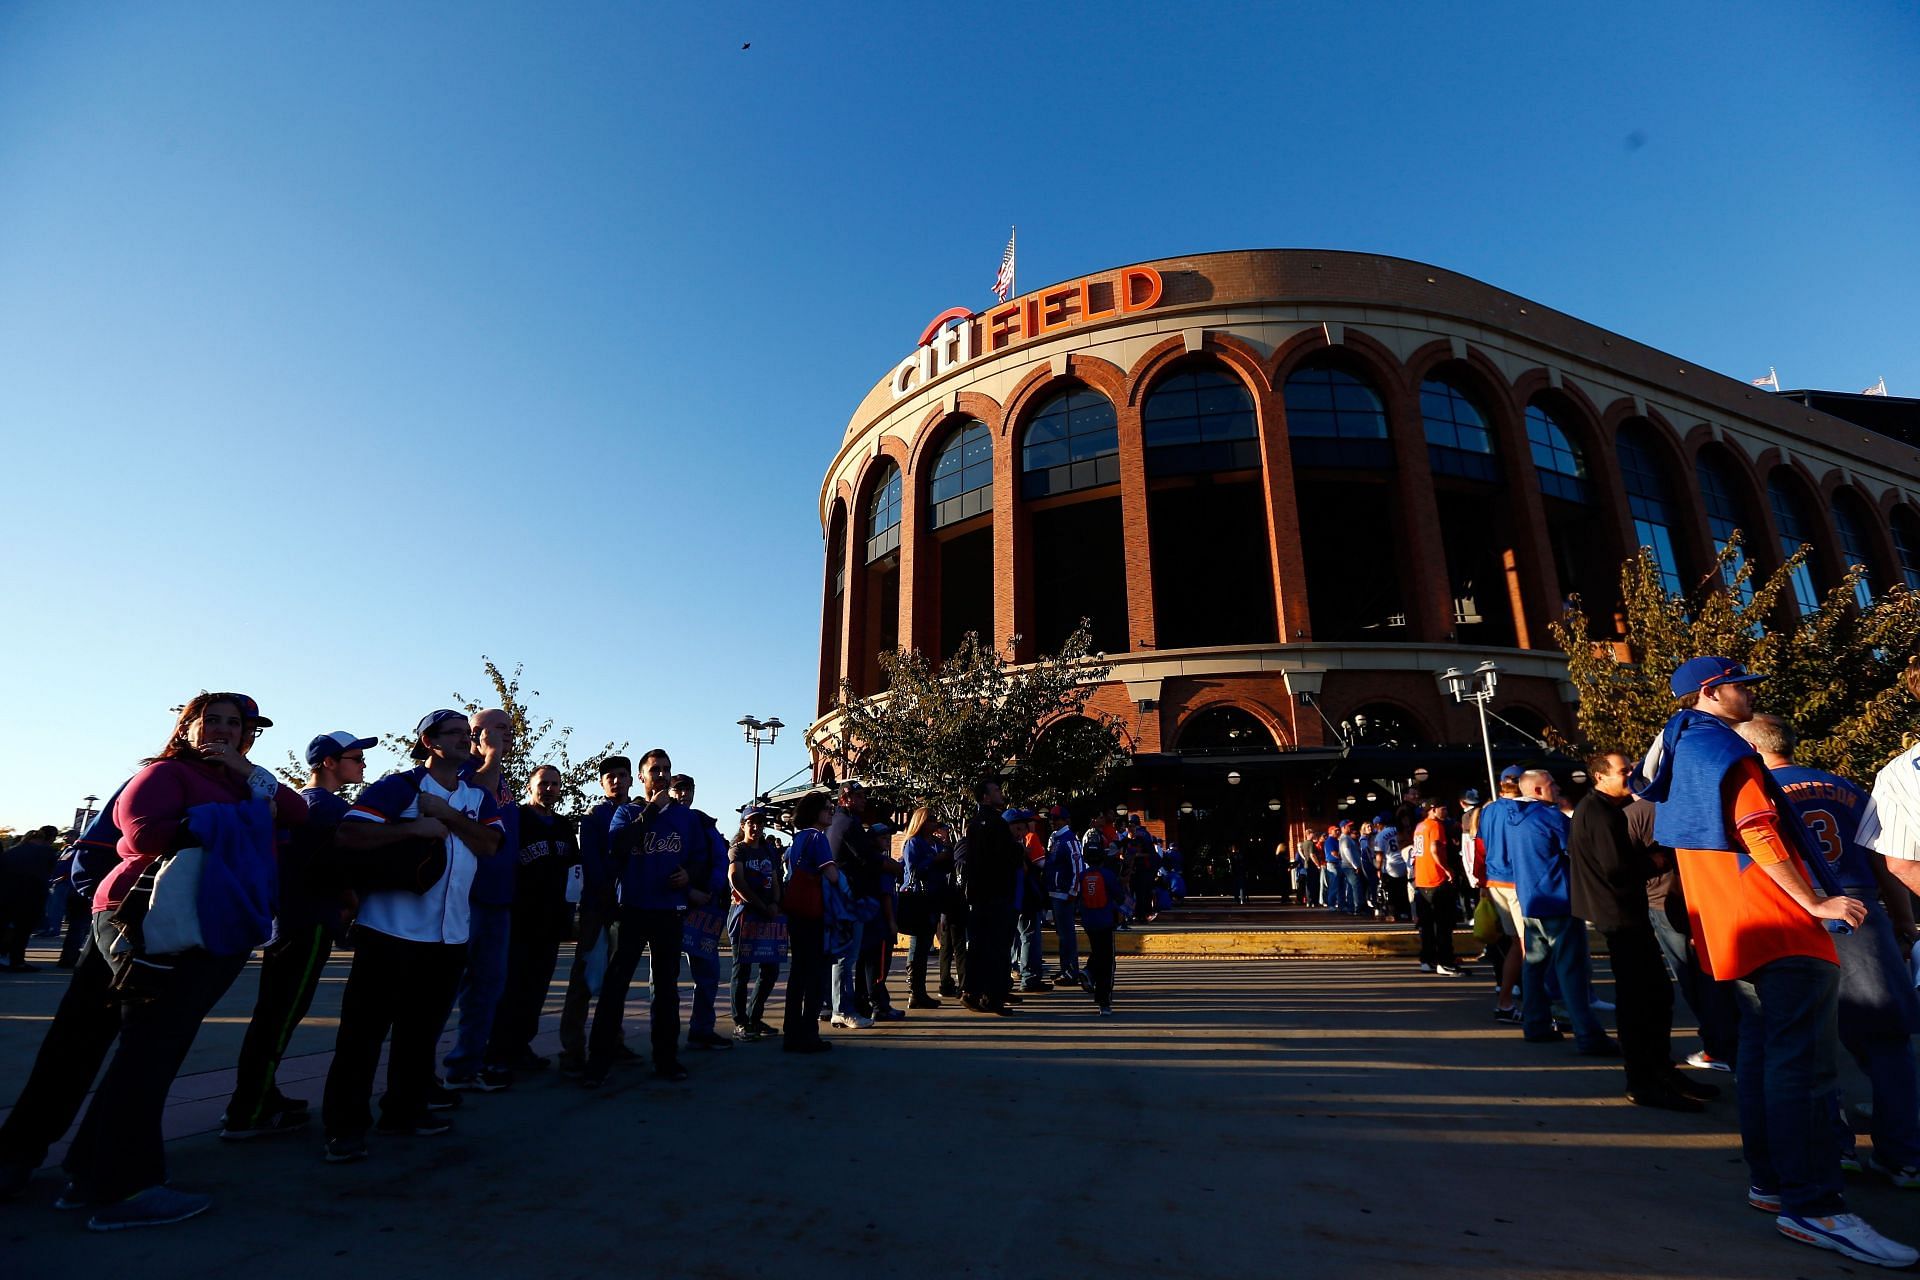 New York Mets fans gather outside of the stadium prior to game three of the NLDS at Citi Field on October 12, 2015 in New York City.